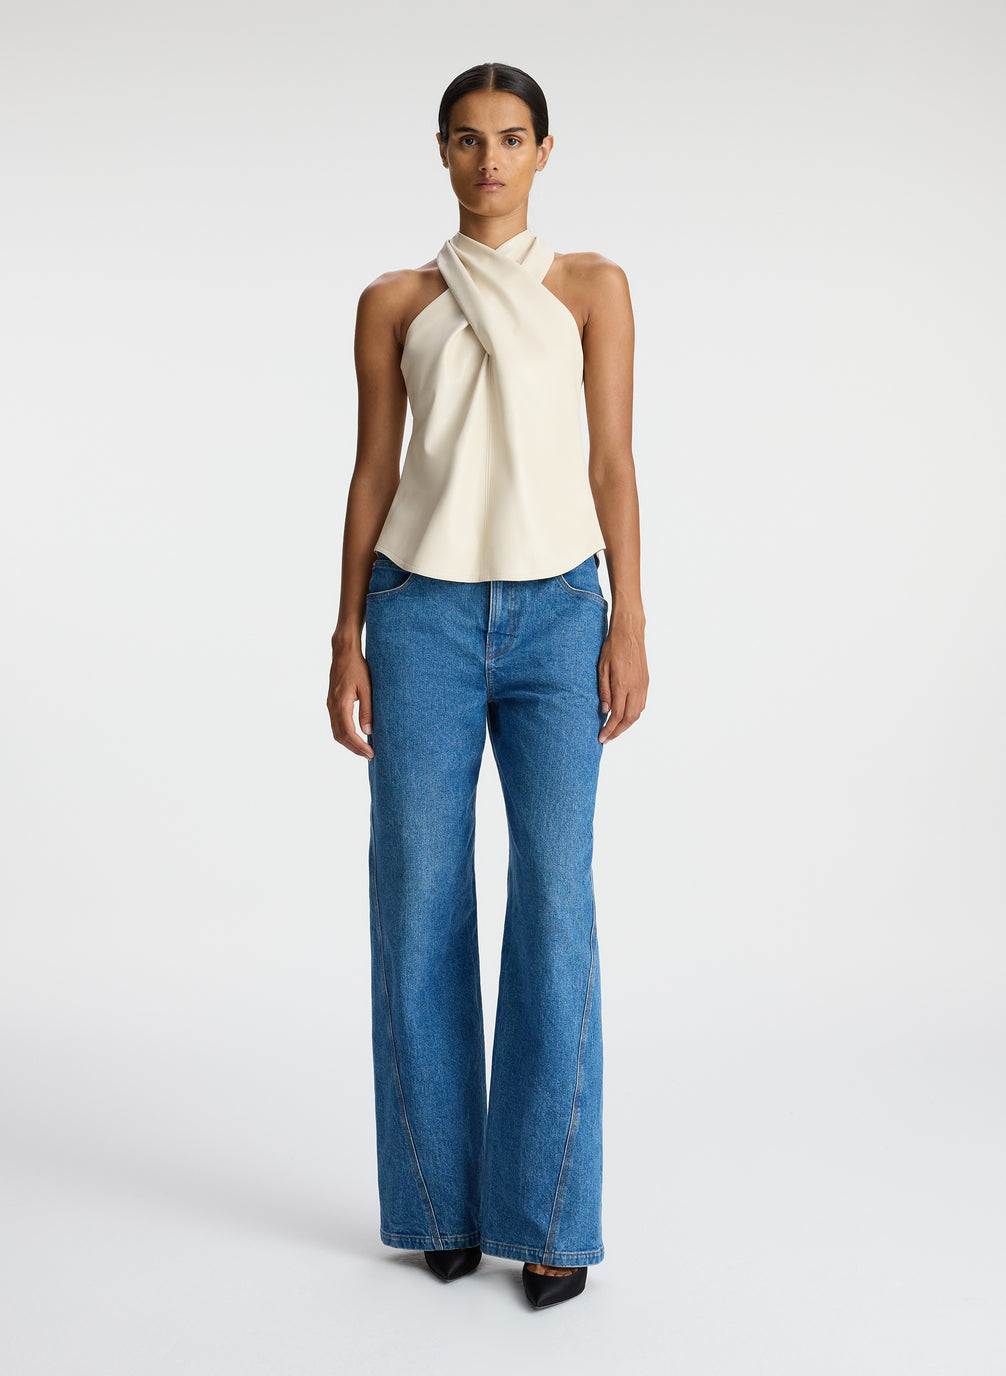 front view of woman wearing cream vegan leather halter top and medium blue wash denim jeans